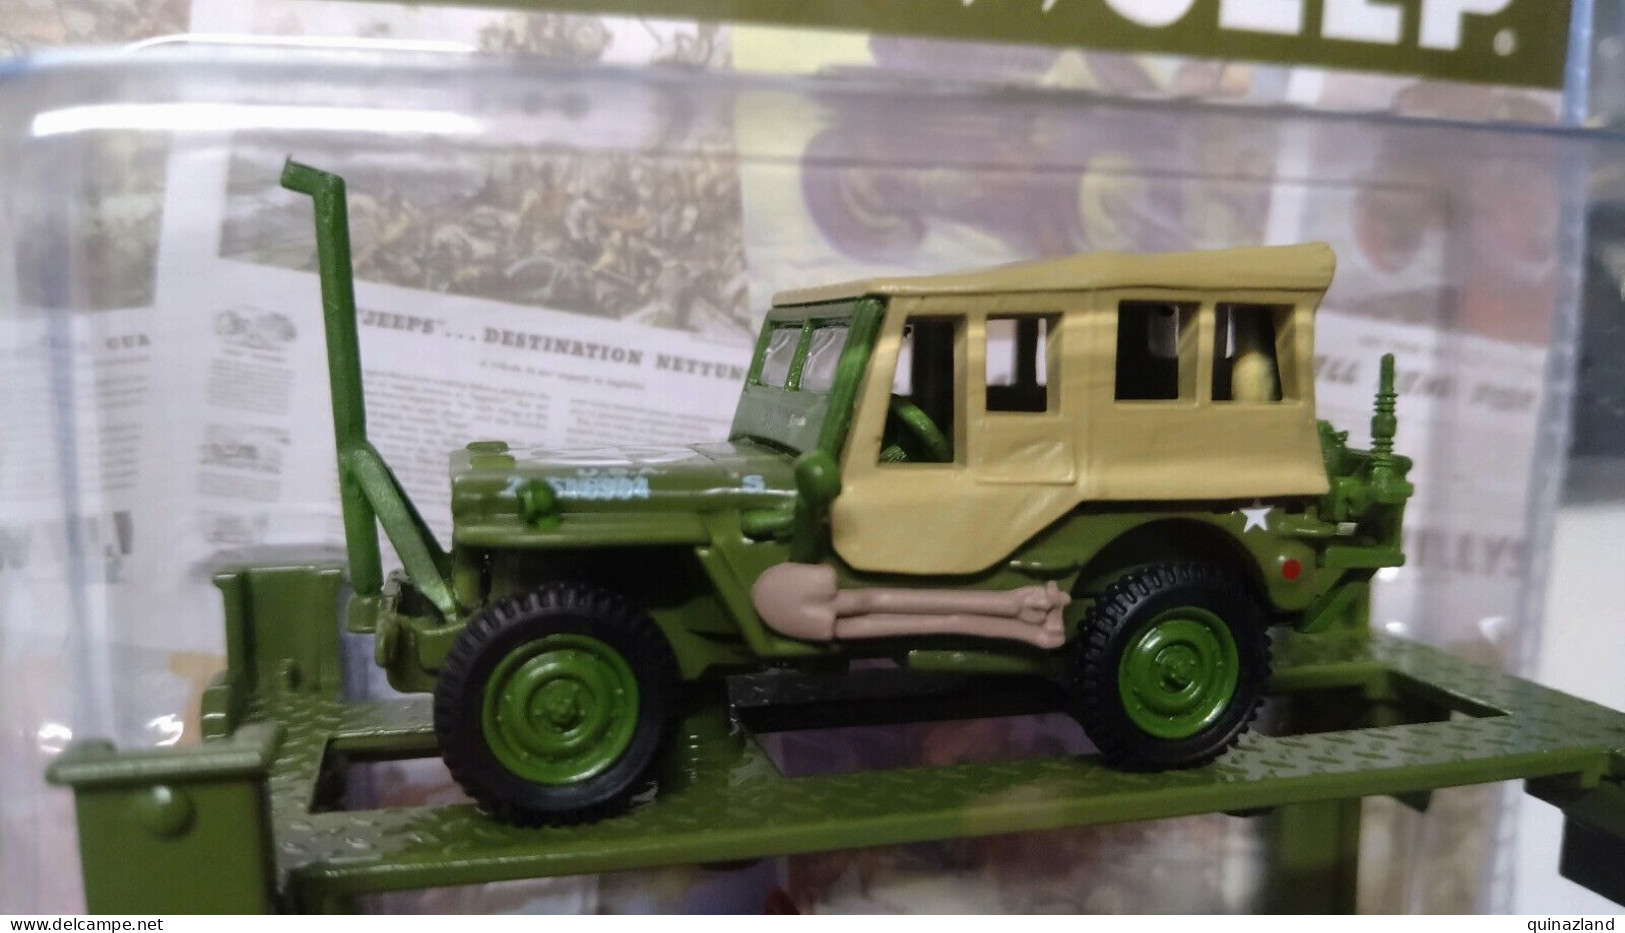 M2 Machines Auto-Lift Willy's Jeep 1944 Jeep MB (NG129) - Sonstige & Ohne Zuordnung